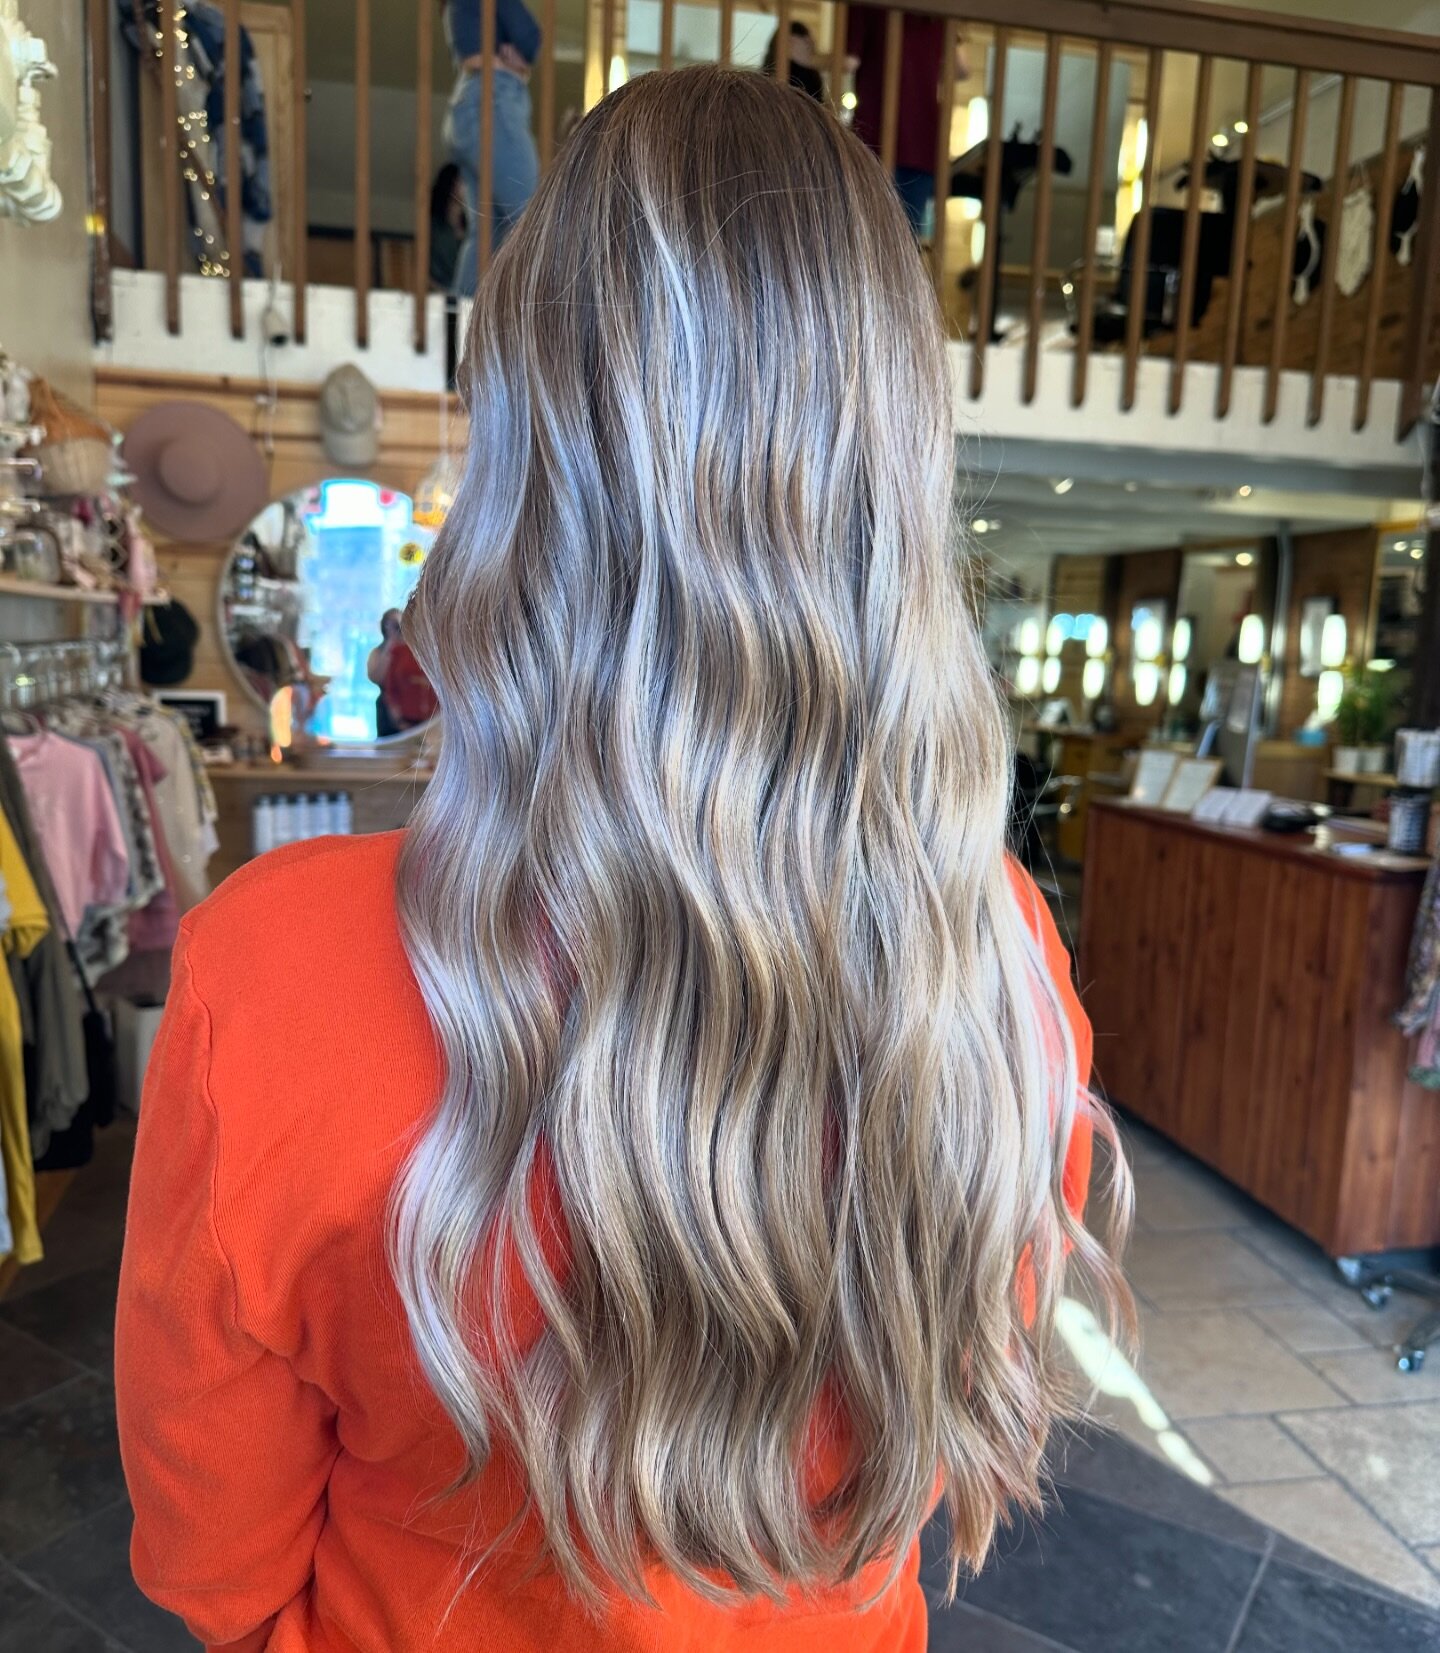 ✨ Nothing feels better than FRESH hair! ✨
Hair by @kylie.r.roots 
✽
✽
✽
✽
✽
Roots Beauty Studio 
115 Linden Street, Fort Collins 
970.484.2119
𝑪𝒂𝒍𝒍 𝒐𝒓 𝒈𝒐 𝒐𝒏𝒍𝒊𝒏𝒆 𝒕𝒐 𝒃𝒐𝒐𝒌 𝒂𝒏 𝒂𝒑𝒑𝒐𝒊𝓷𝒕𝒎𝒆𝒏𝒕